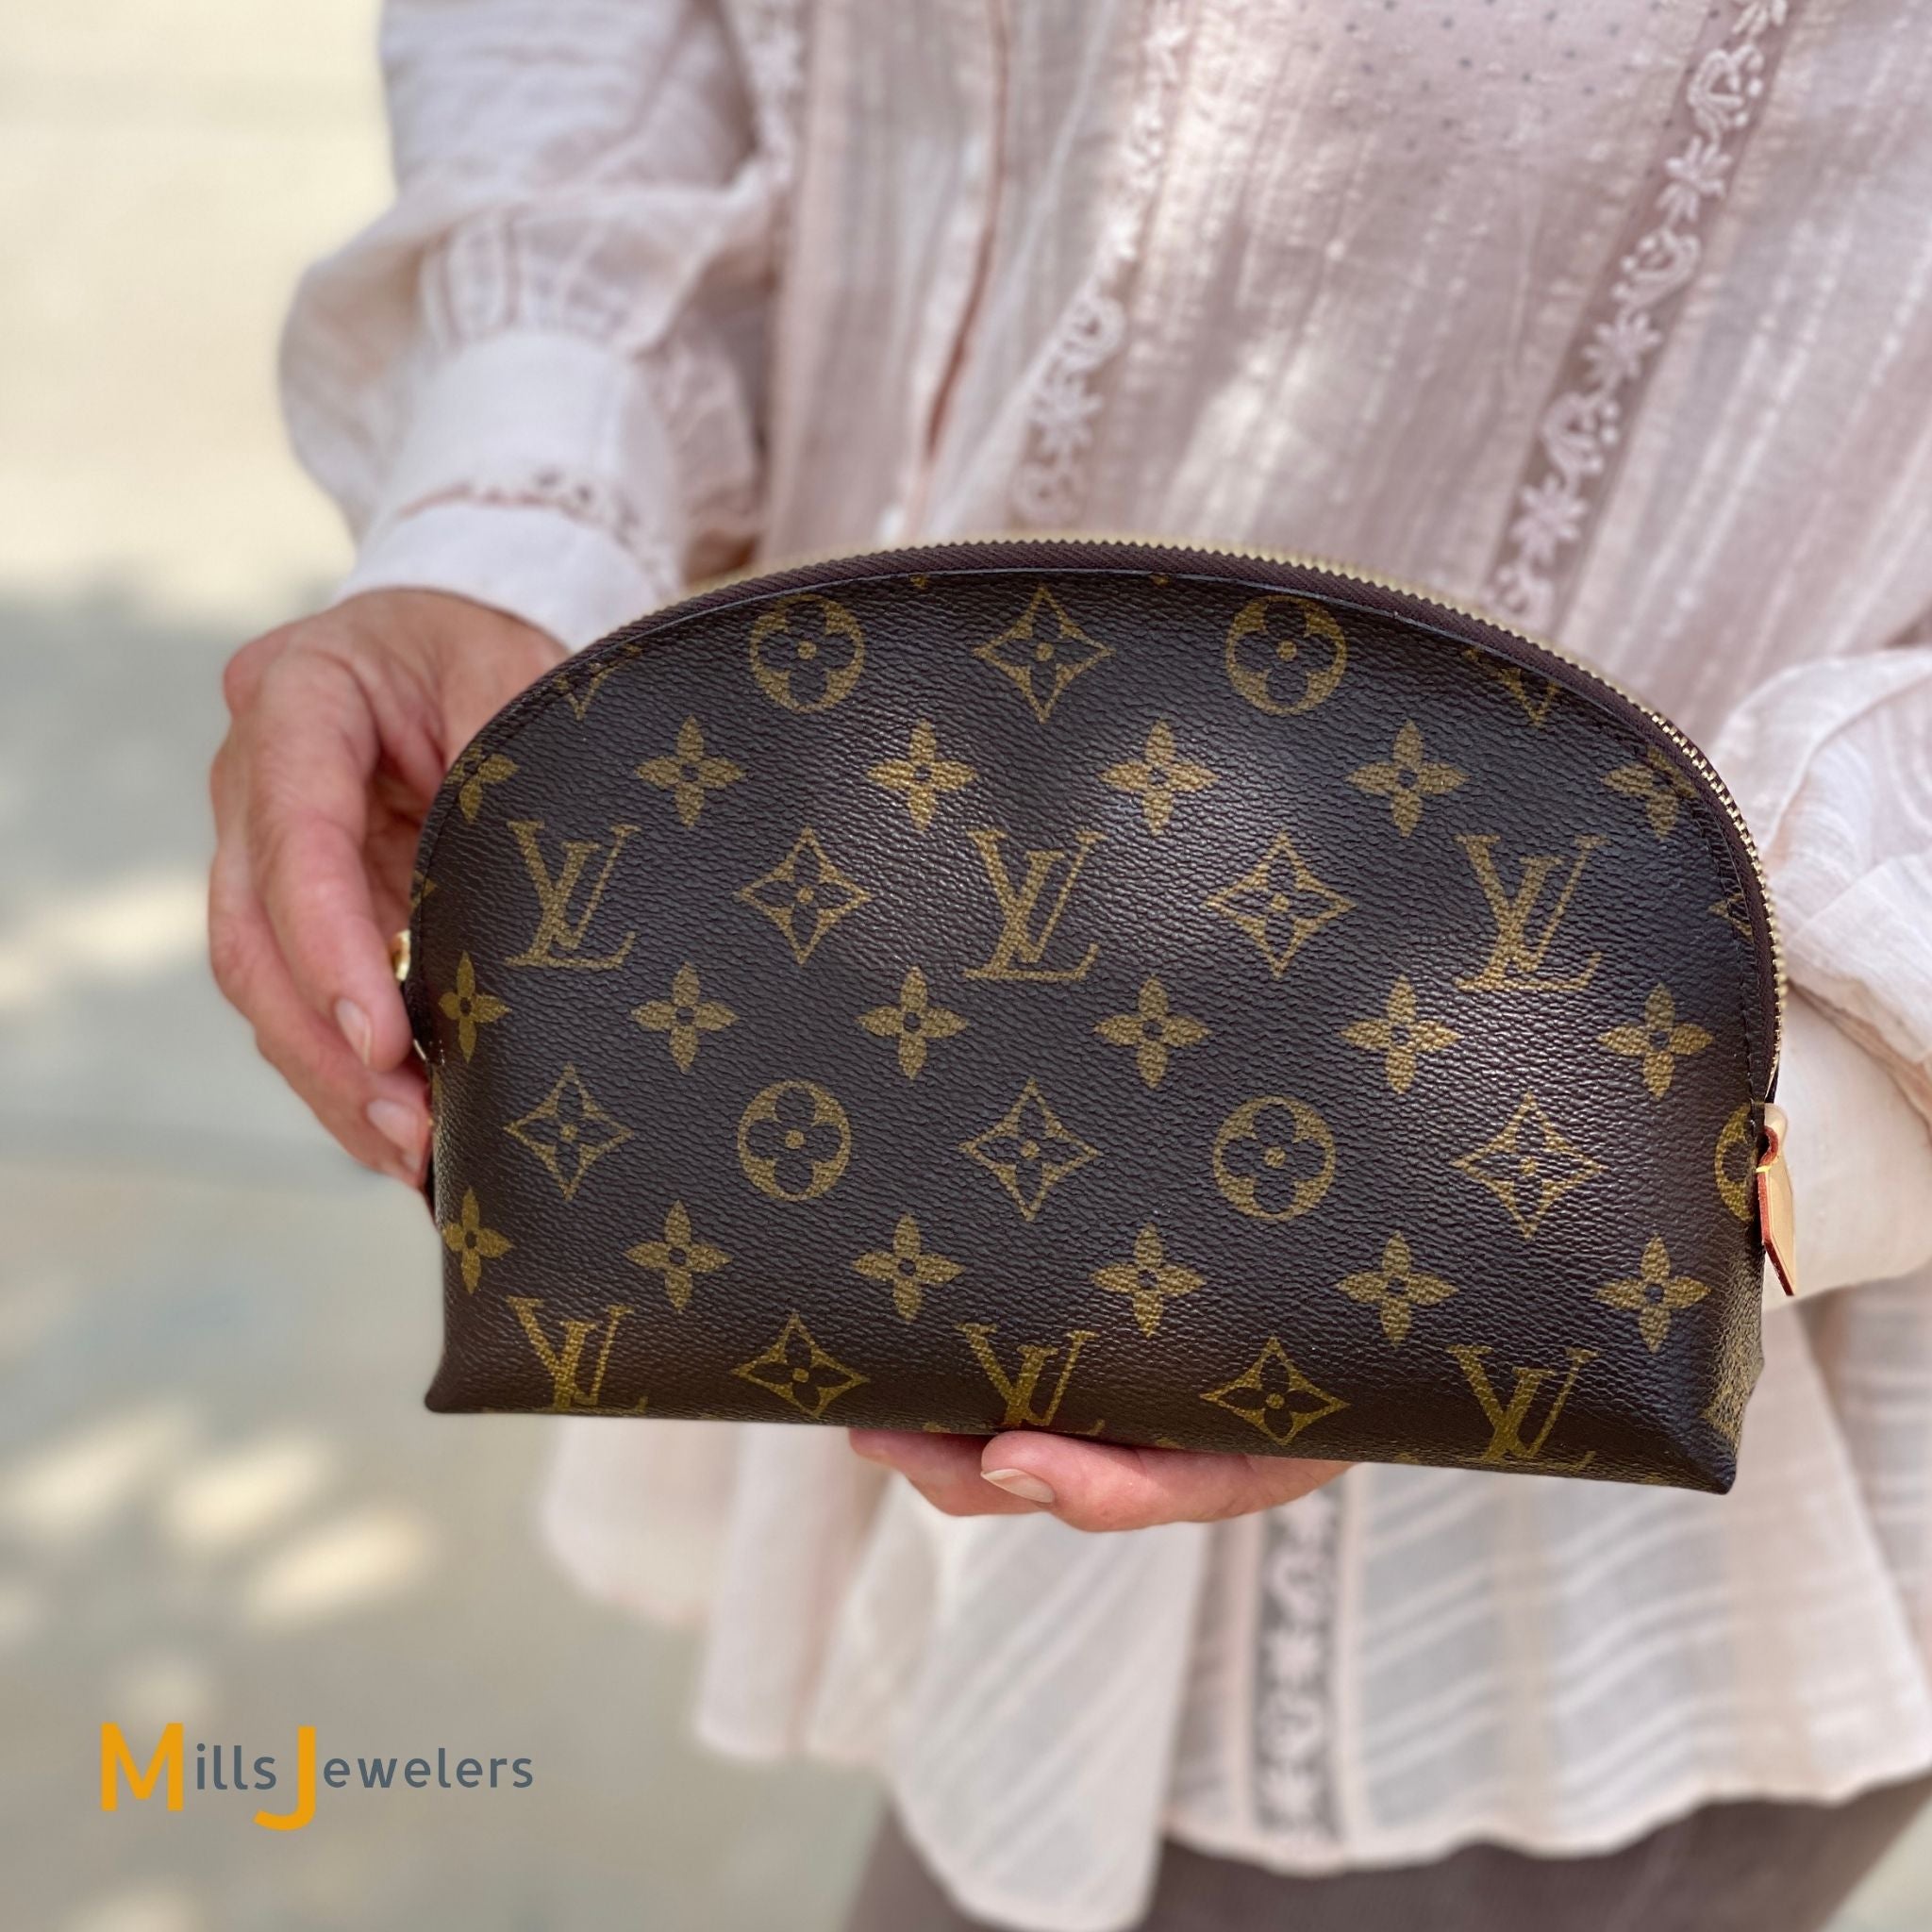 LV cosmetic bag set review and link in comment section : r/DHgate